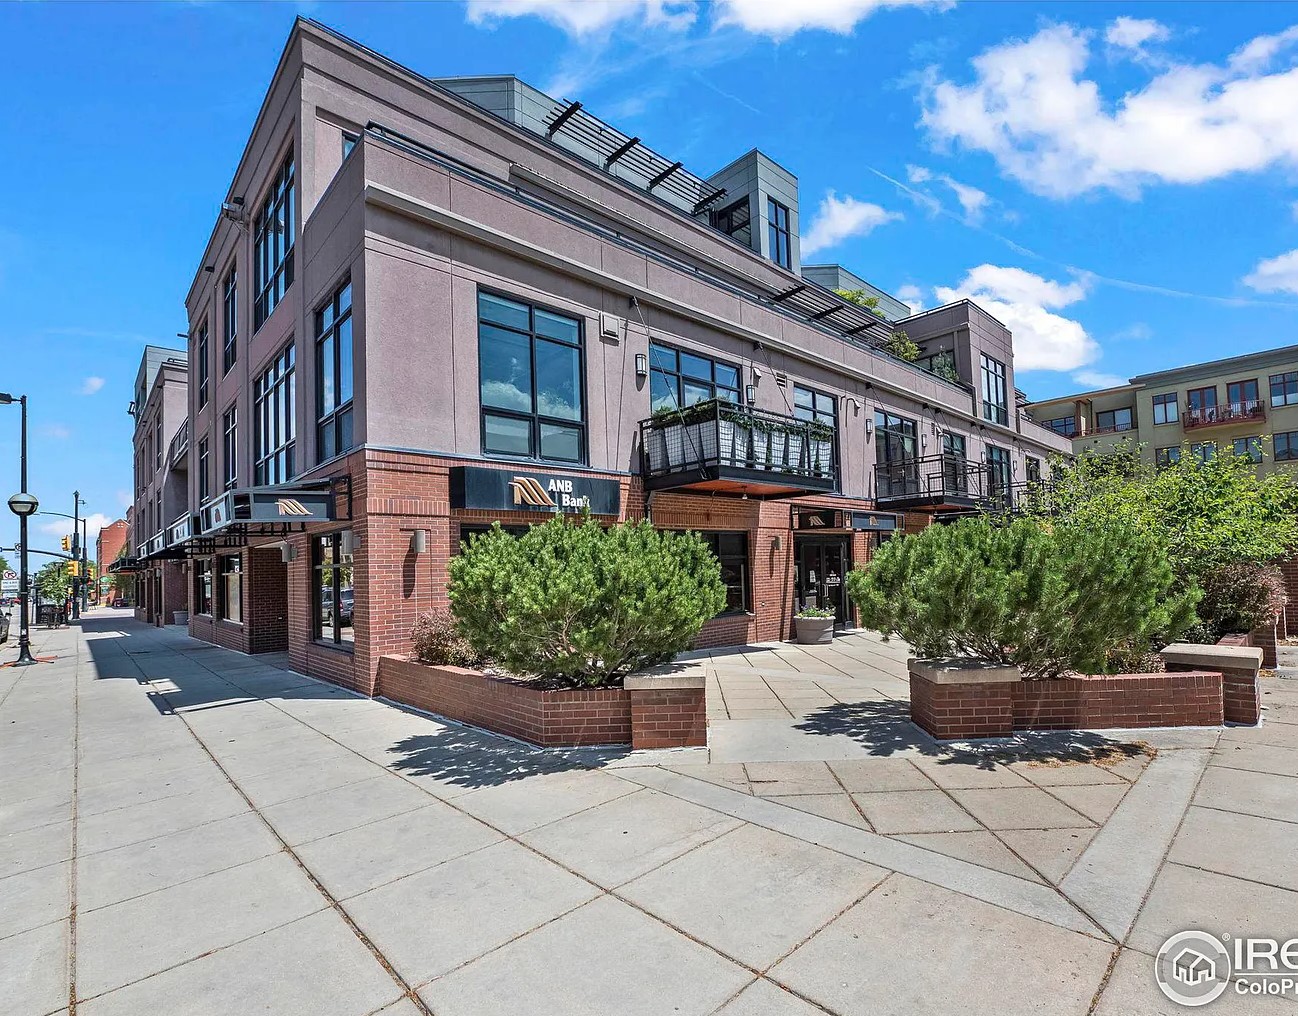 Luxury Loft-Style Living In The Heart Of Downtown Boulder